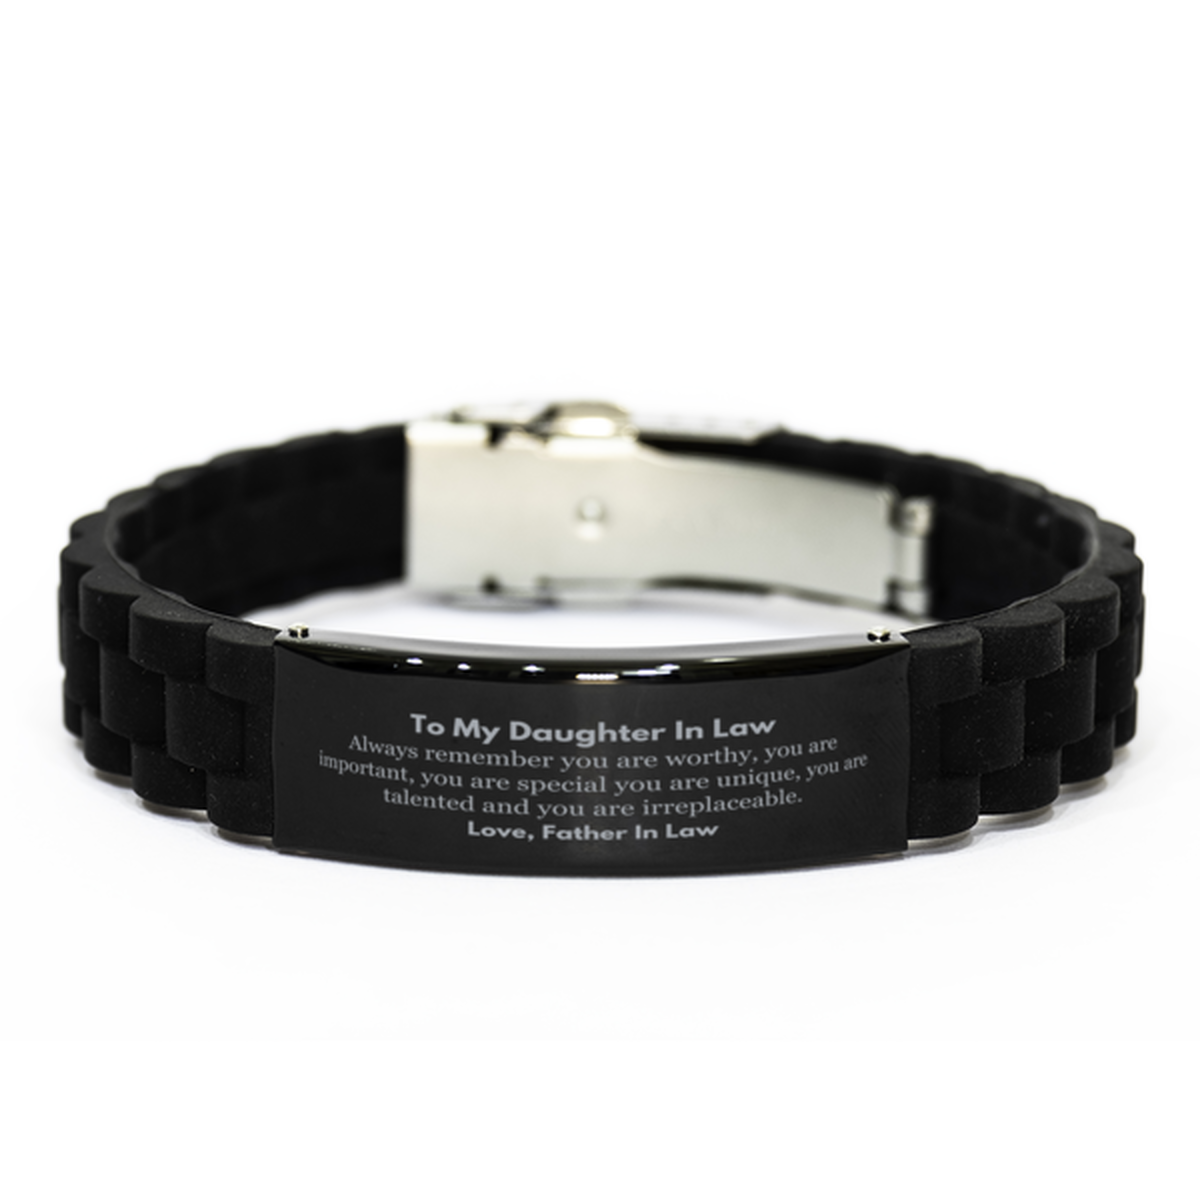 Daughter In Law Birthday Gifts from Father In Law, Inspirational Black Glidelock Clasp Bracelet for Daughter In Law Christmas Graduation Gifts for Daughter In Law Always remember you are worthy, you are important. Love, Father In Law